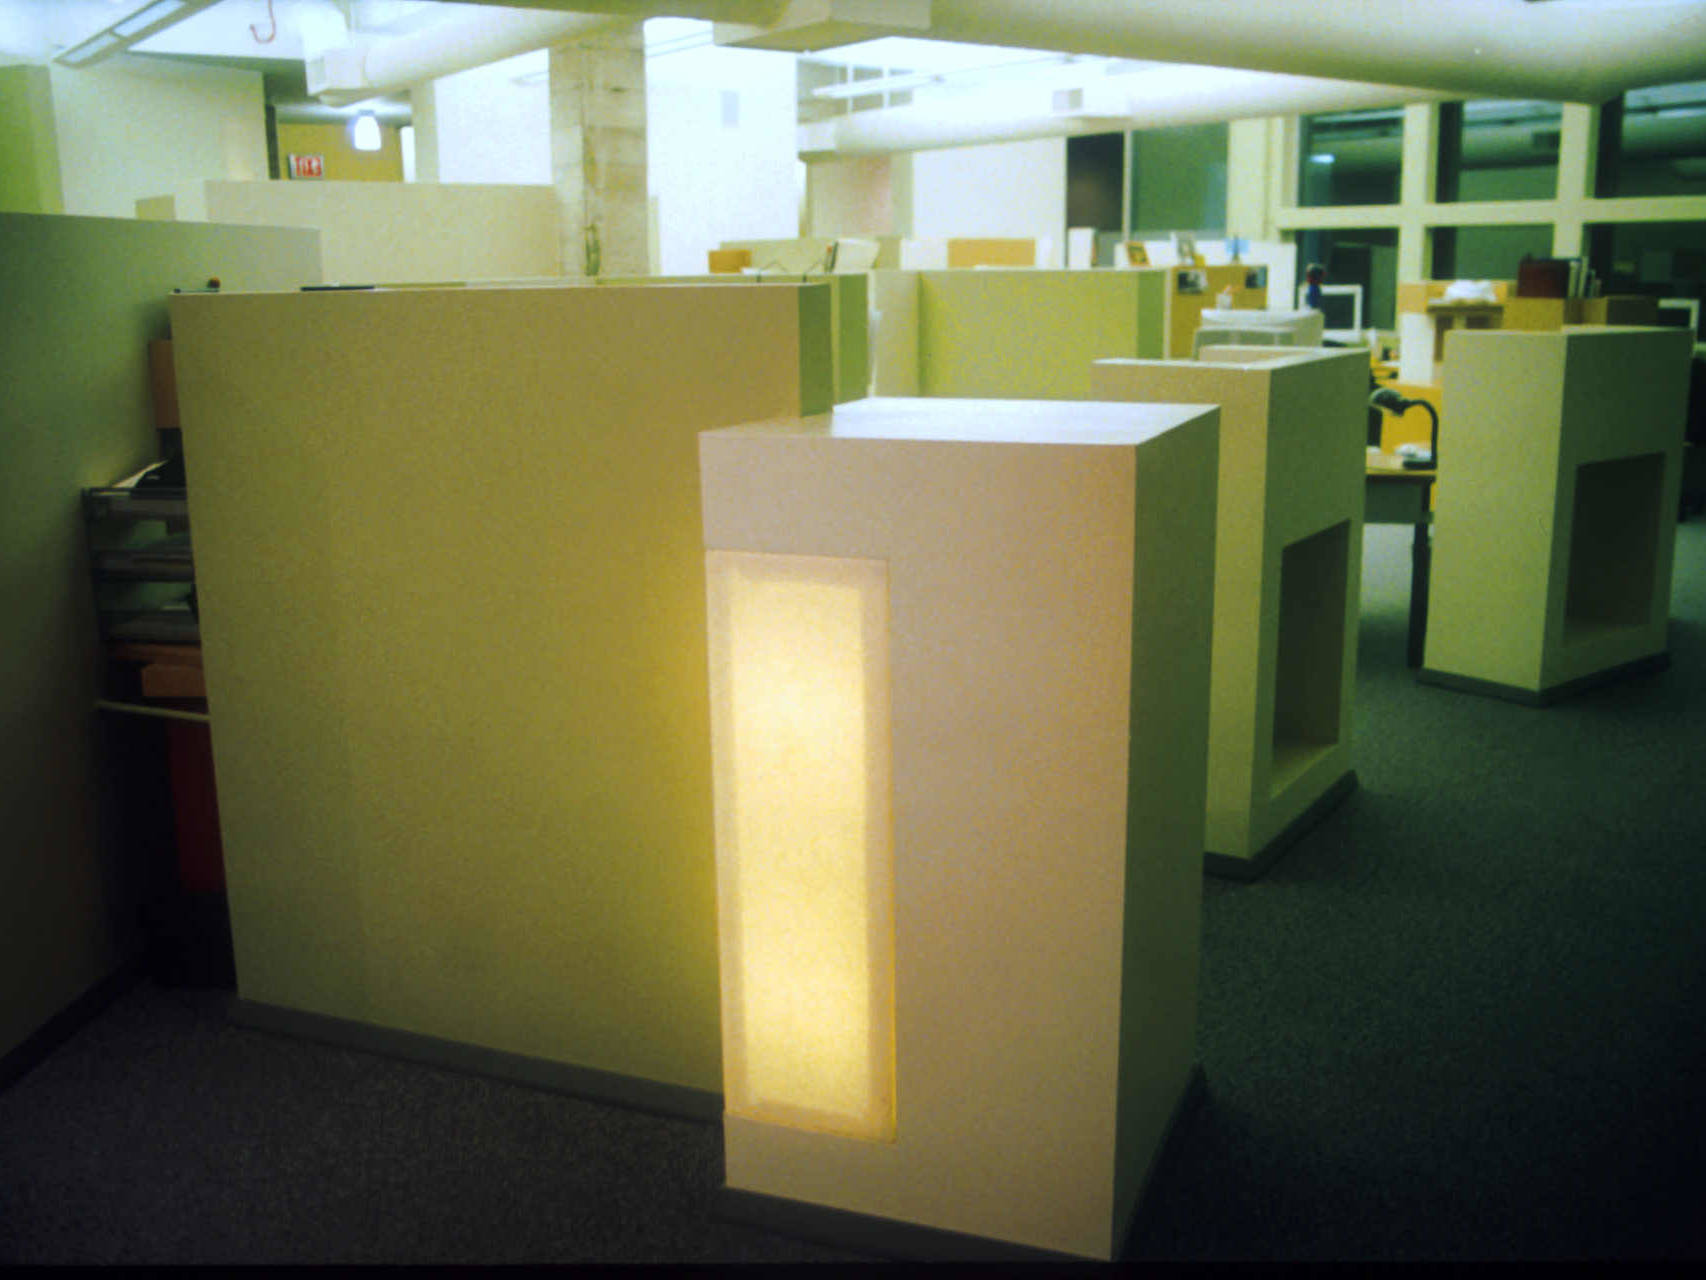 work space partitions with illuminated walls